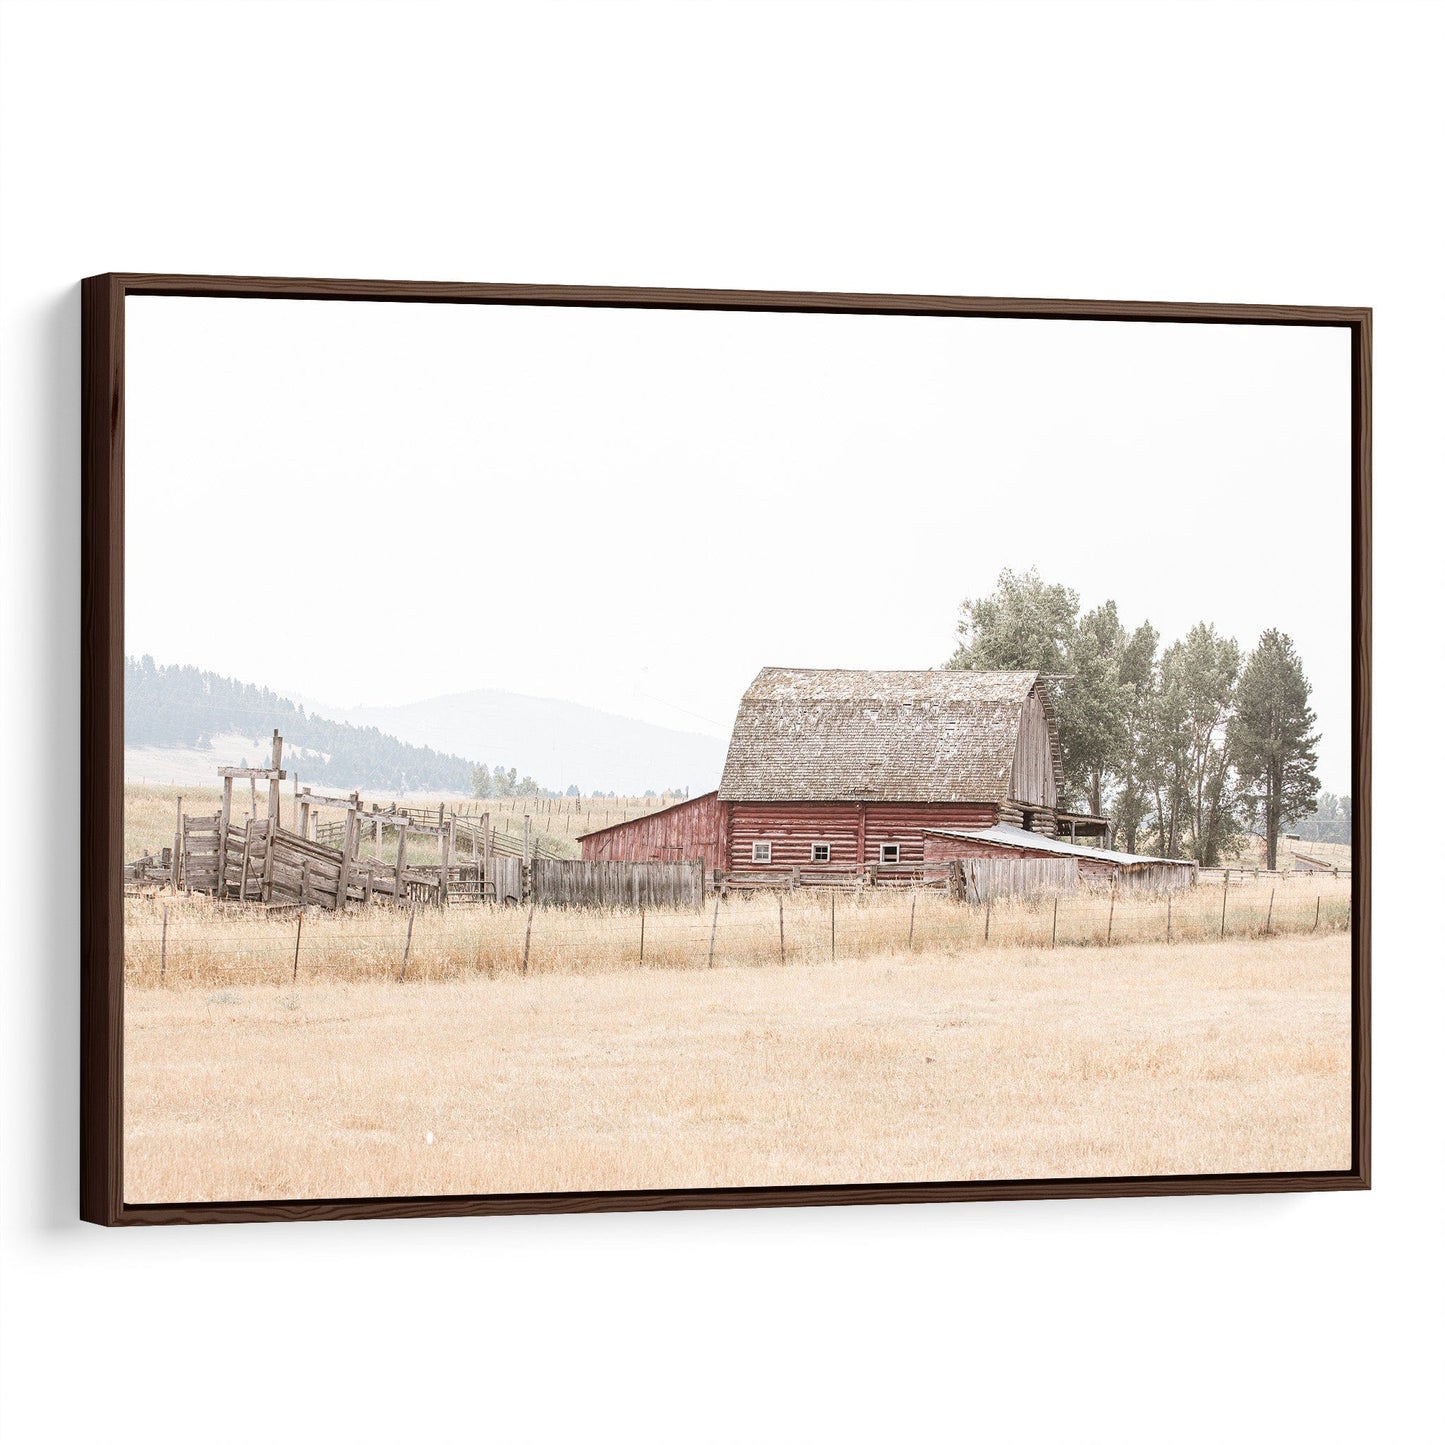 Rustic Old Red Barn and Corral in Farmhouse Colors Canvas-Walnut Frame / 12 x 18 Inches Wall Art Teri James Photography